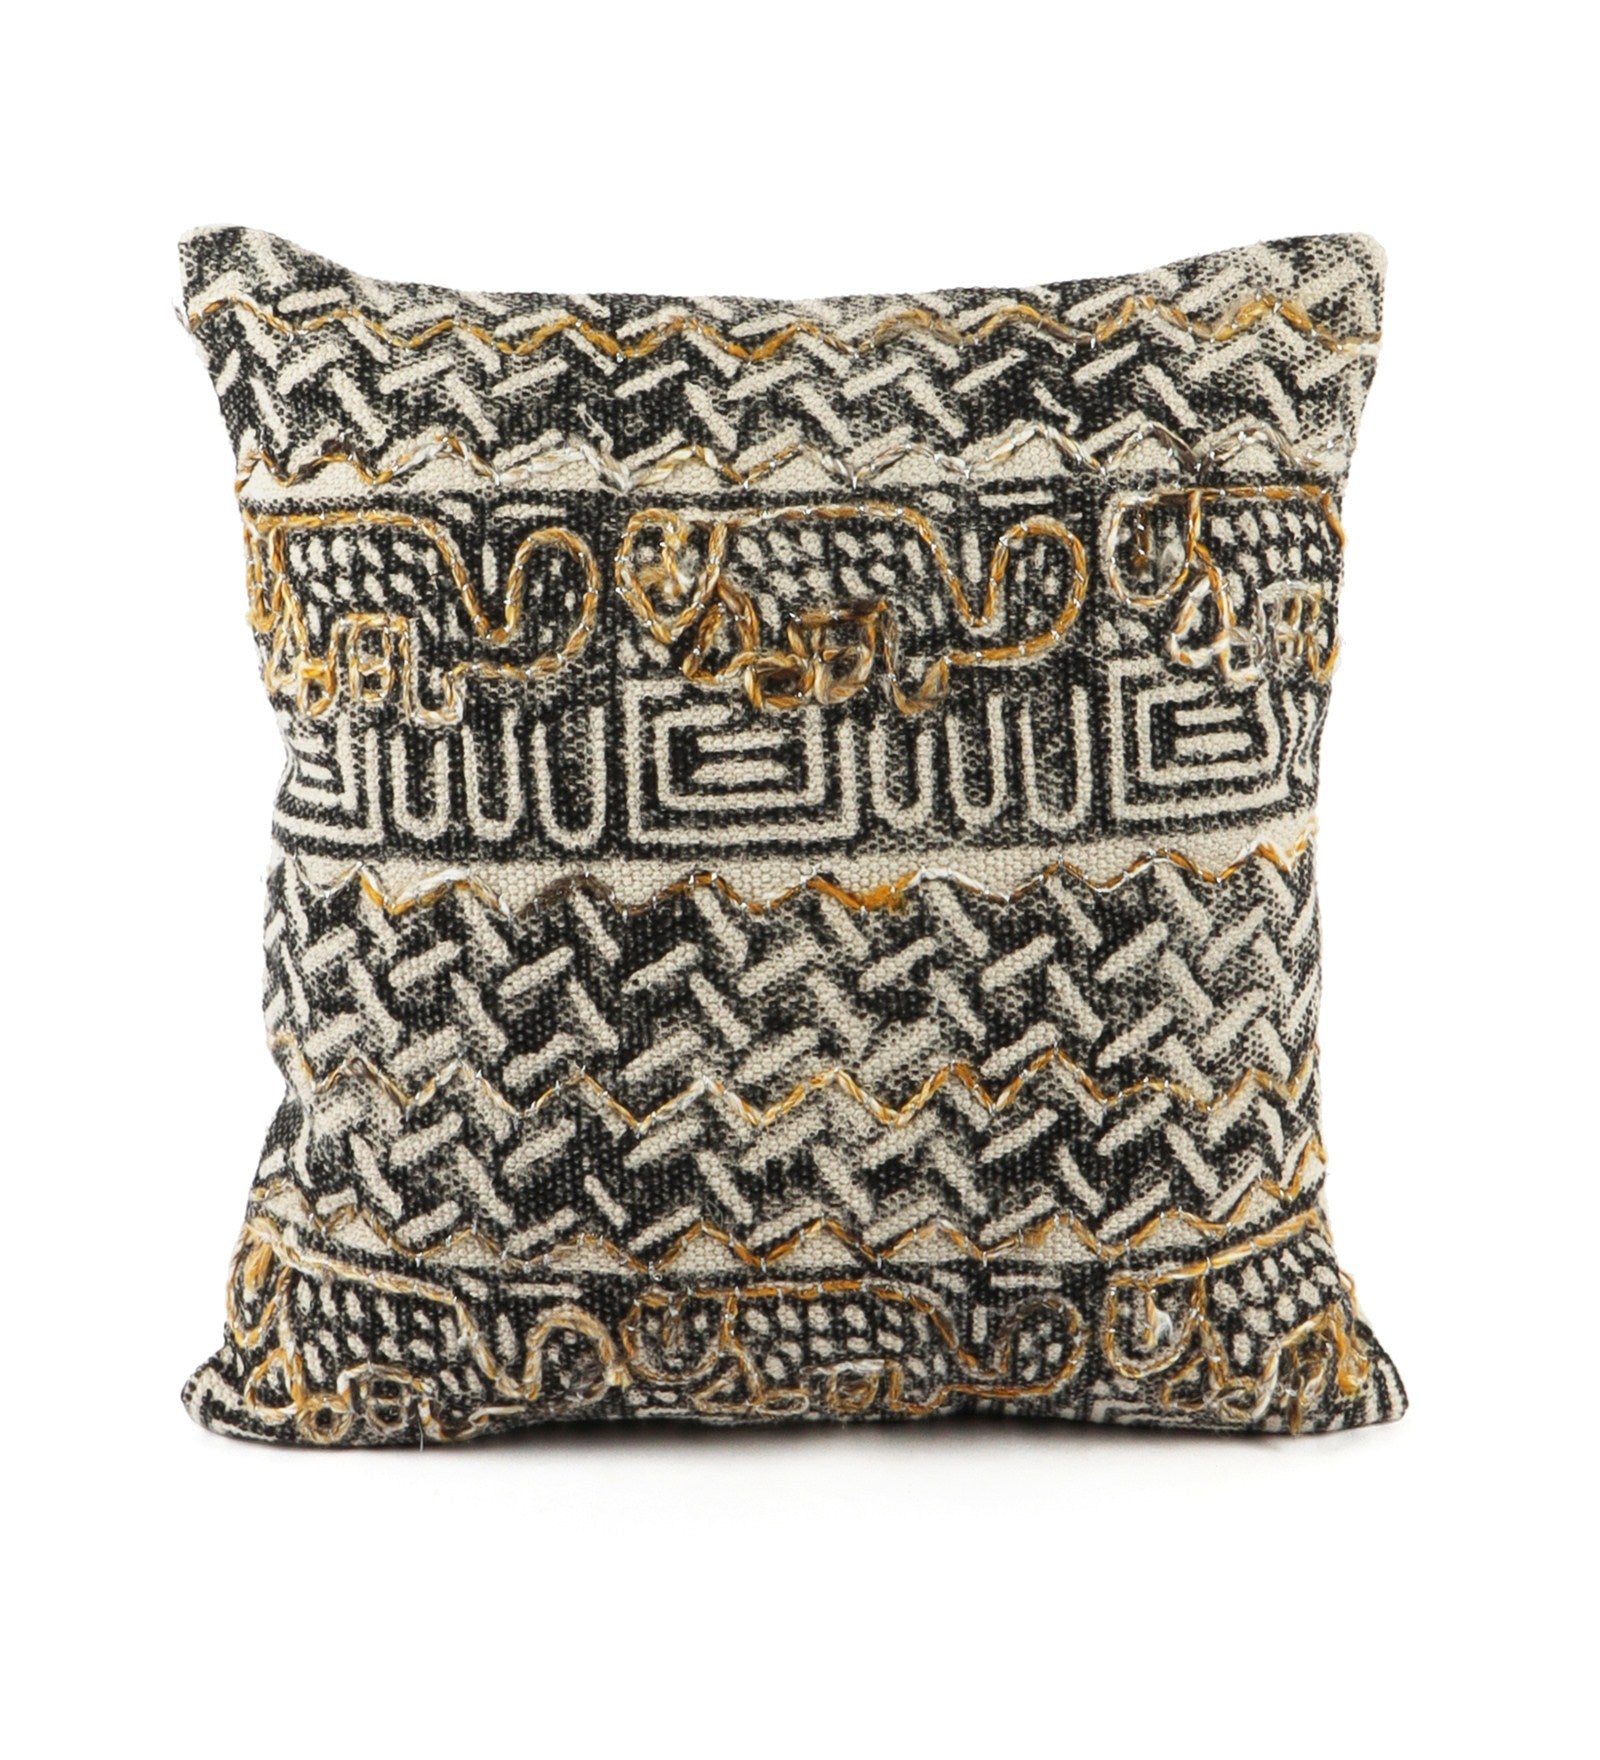 Embroidered Contemporary Cushion Cover (Black-Beige Abstract)